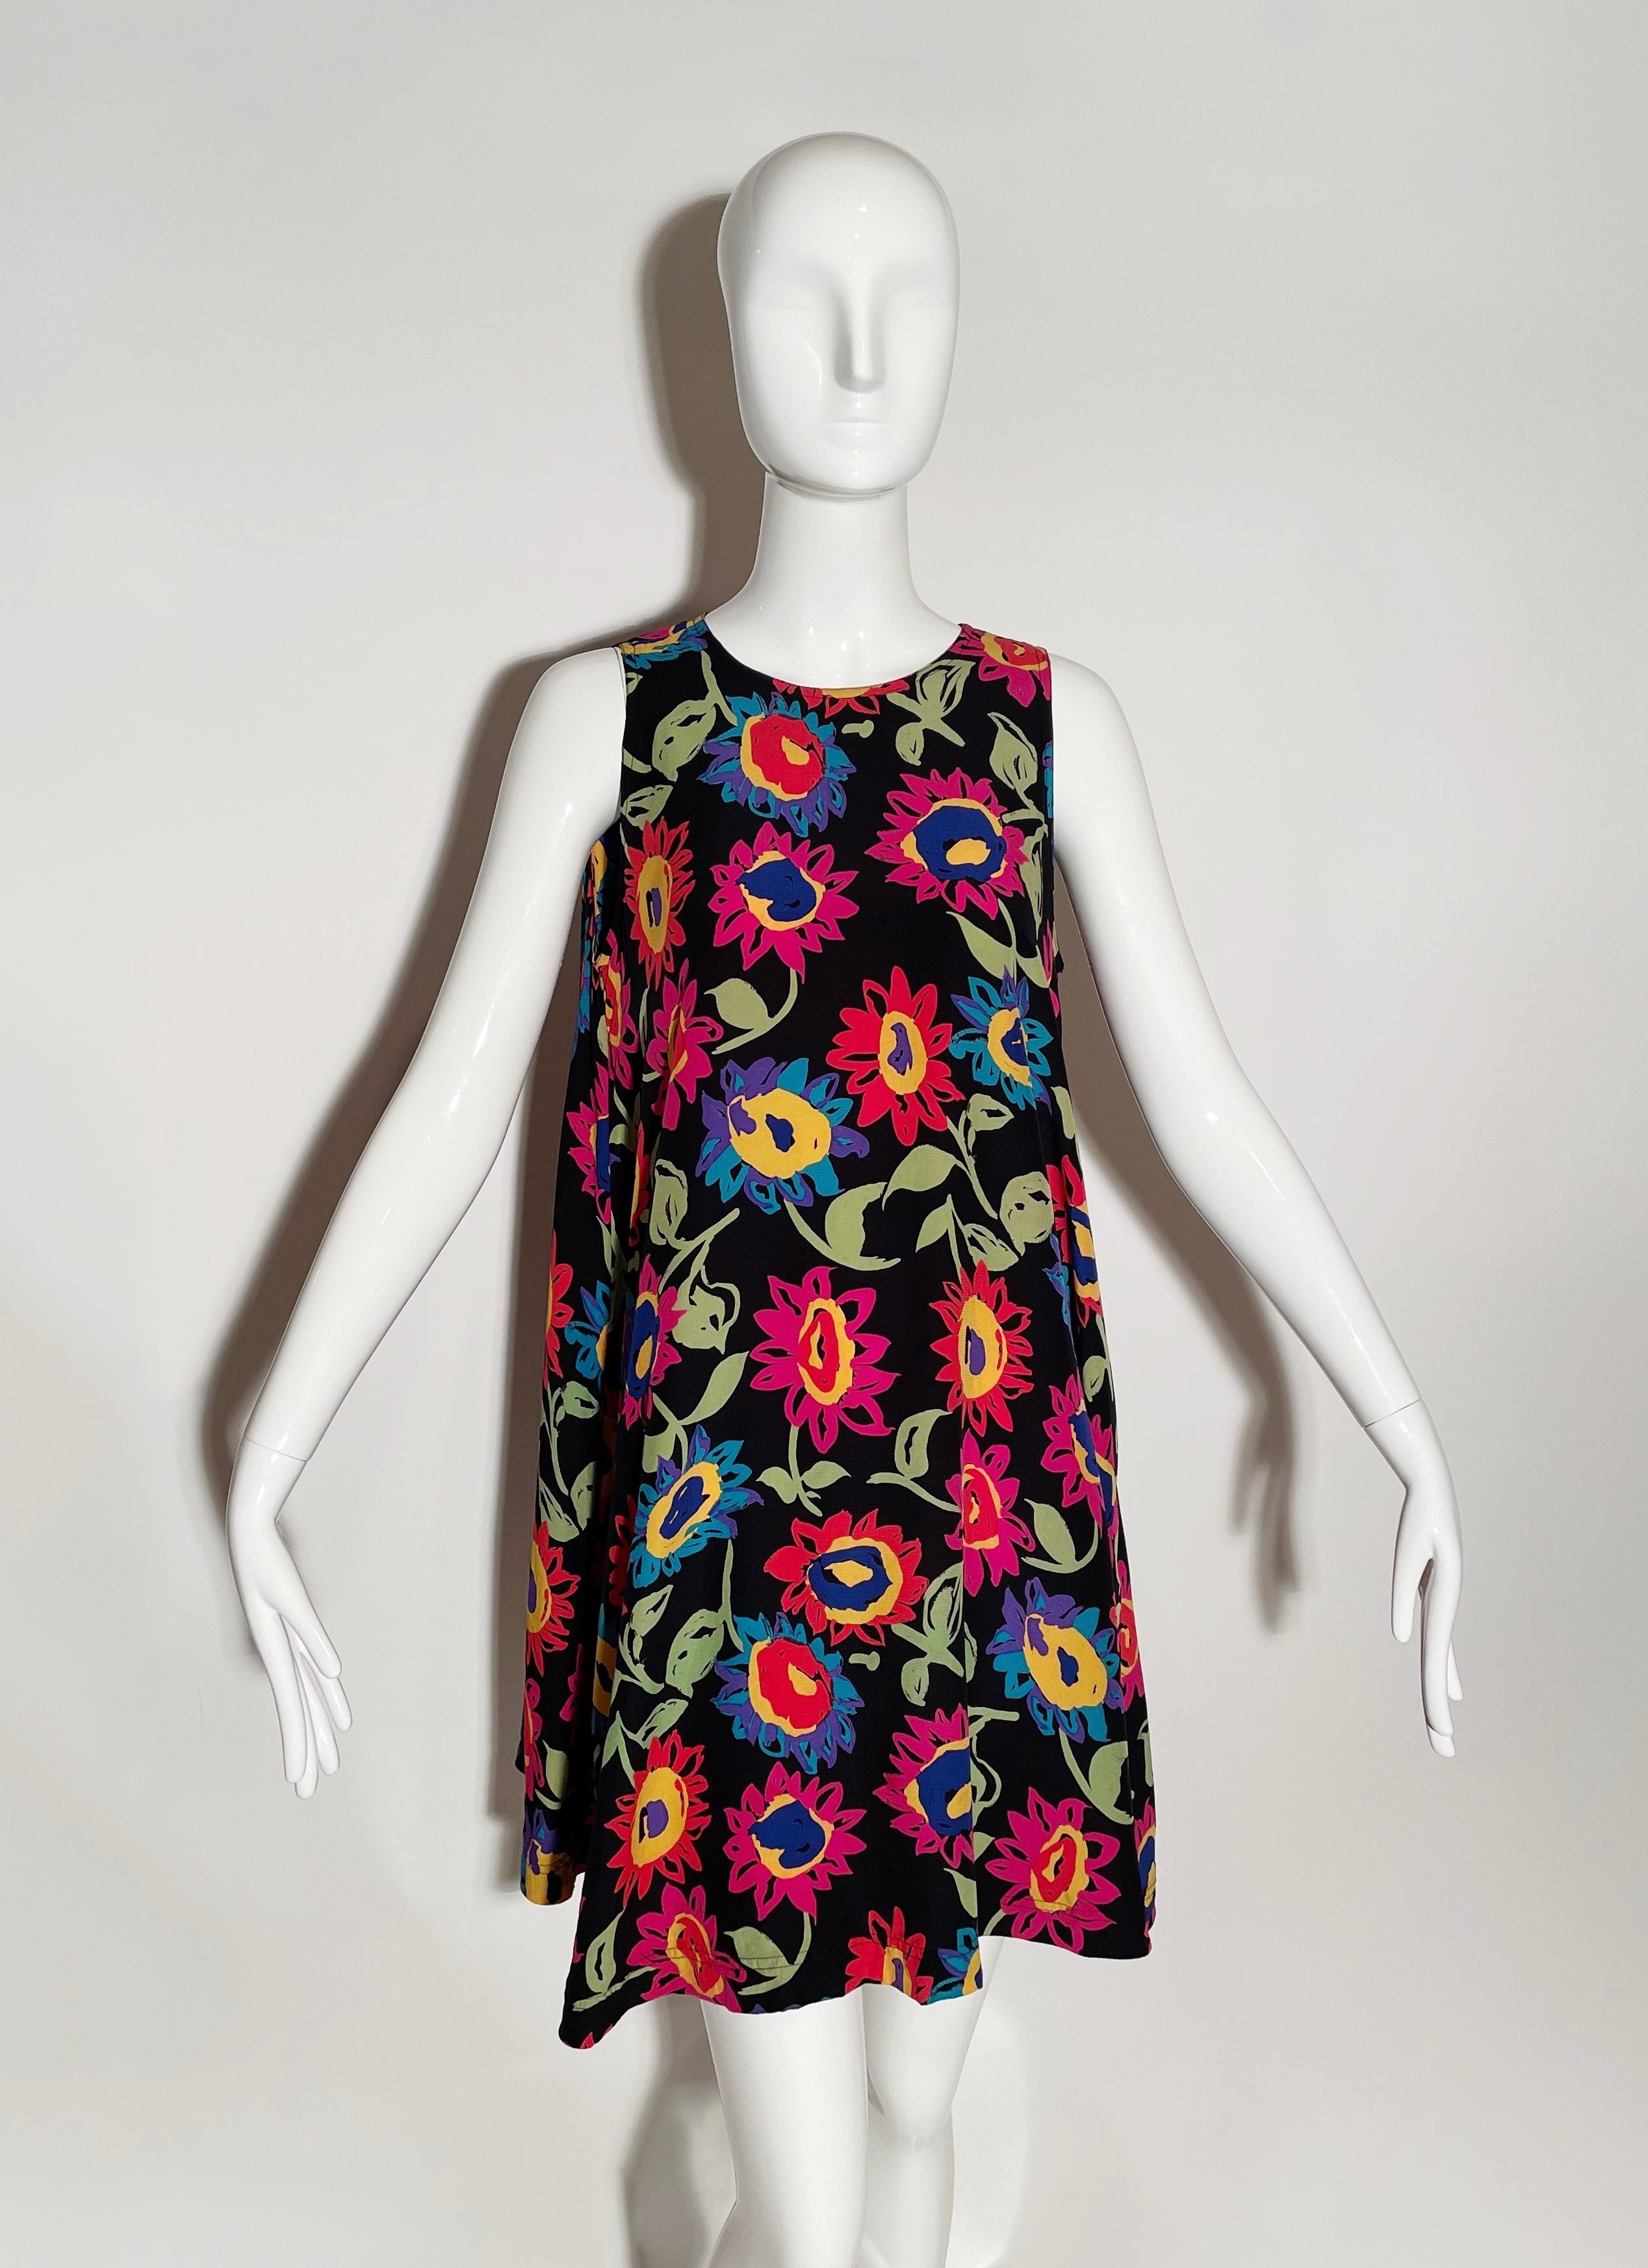 Black floral summer dress. Lightweight and relaxed. Sleeveless. Closure at back. Pockets at side. Silk. Made in Hong Kong.

*Condition: good vintage condition, there are a few small areas where color has bled on flowers (as pictured), not